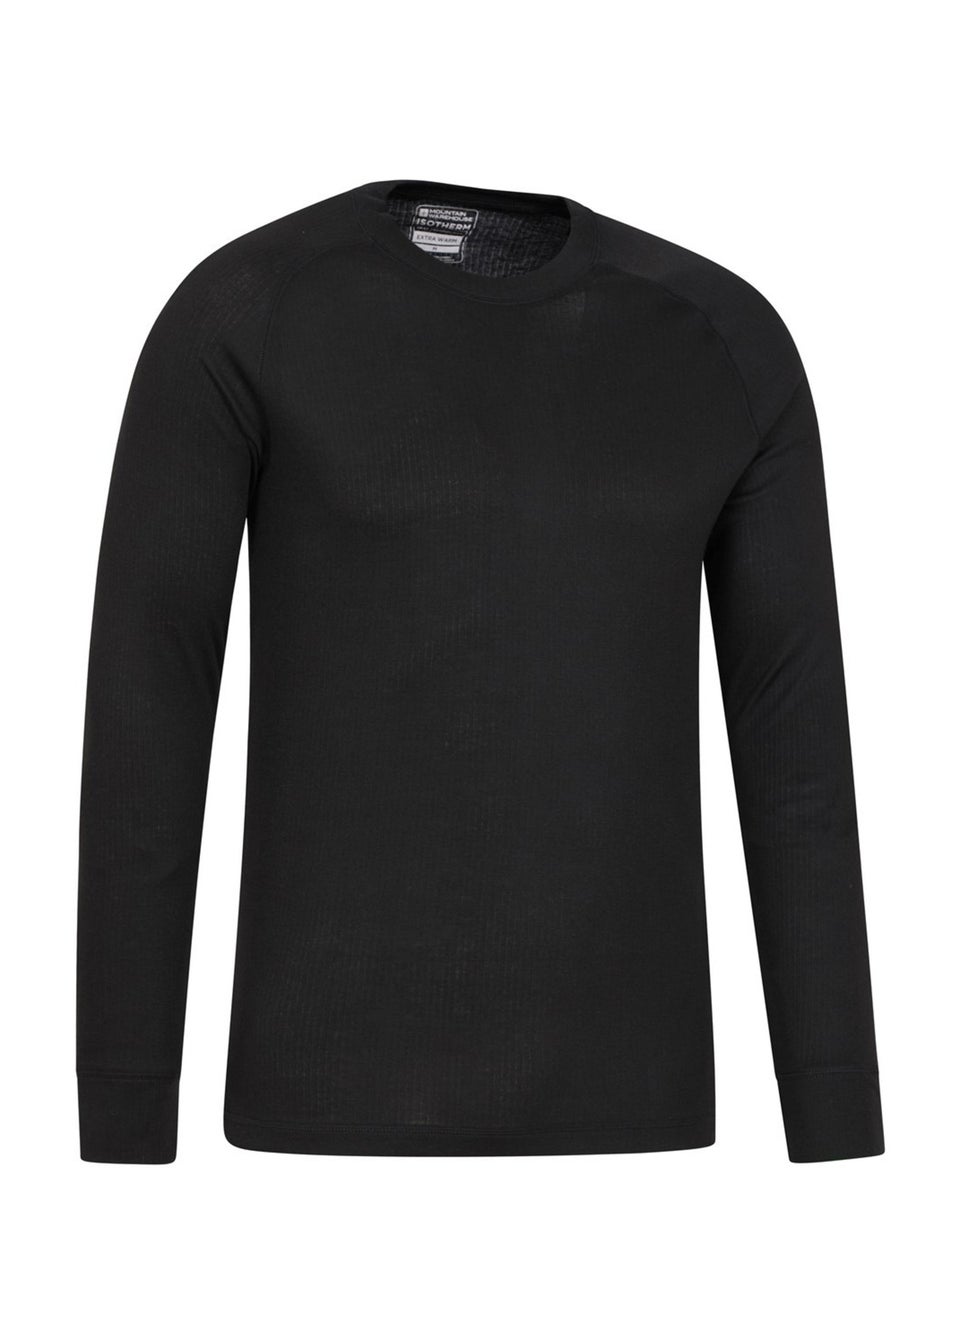 Mountain Warehouse Black  Talus Round Neck Long-Sleeved Thermal Top